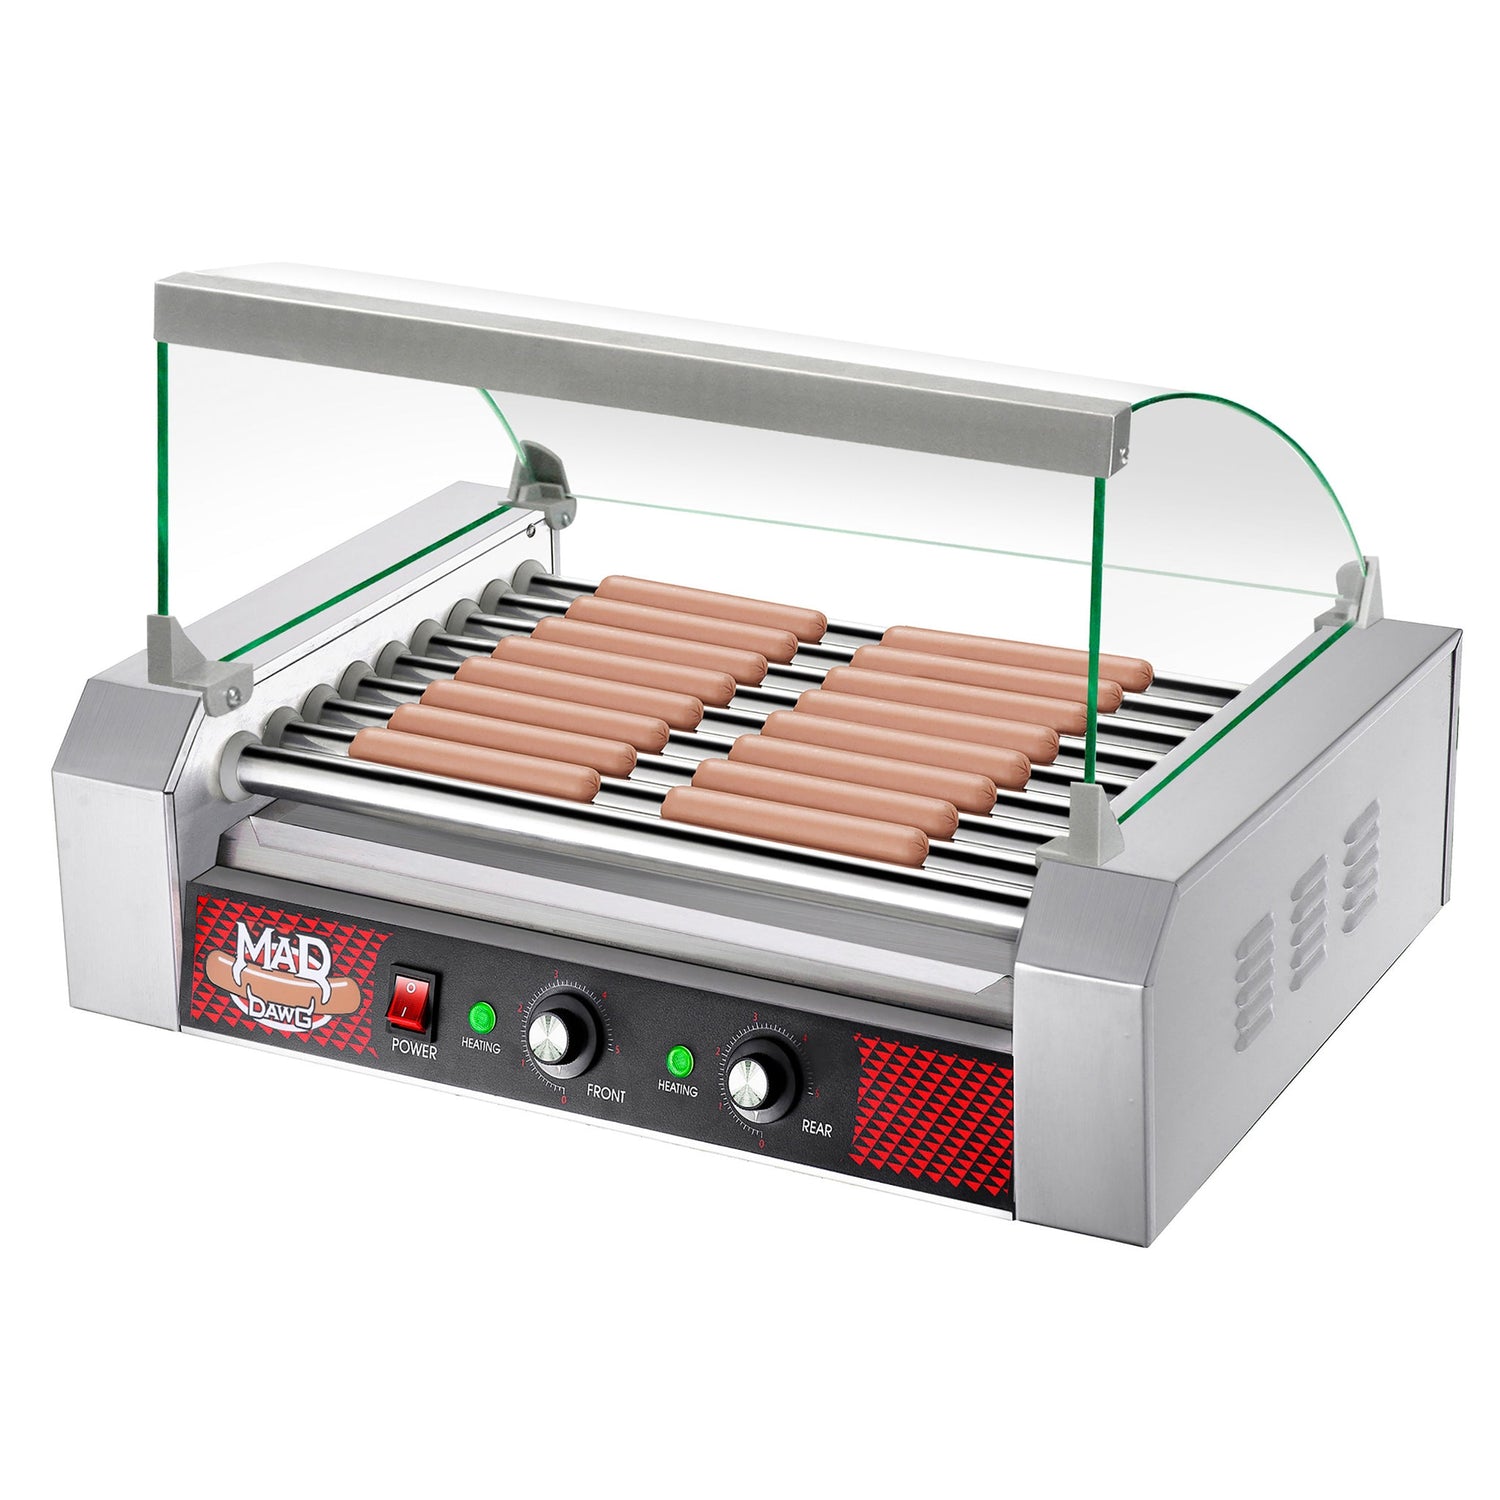 24 Hot Dog 9 Roll Hot Dog Machine with Tempered Glass Cover Parts